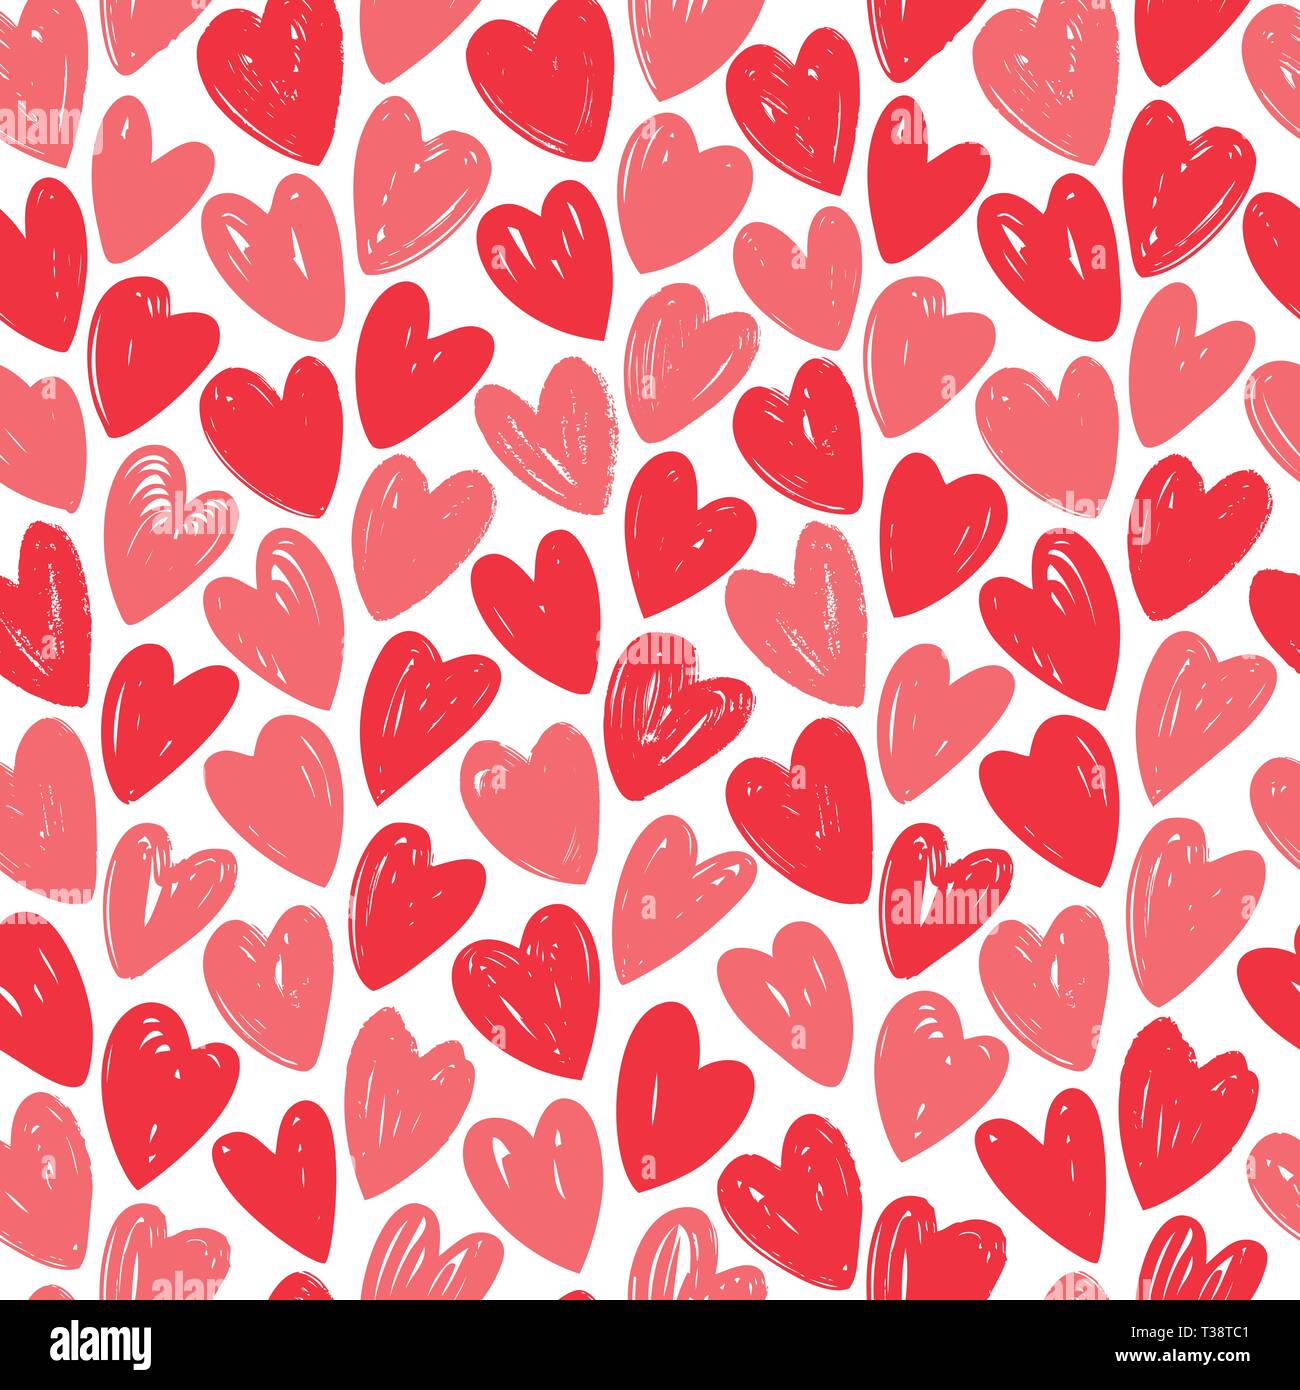 Hearts, seamless background. Hand drawn vector illustration Stock Vector